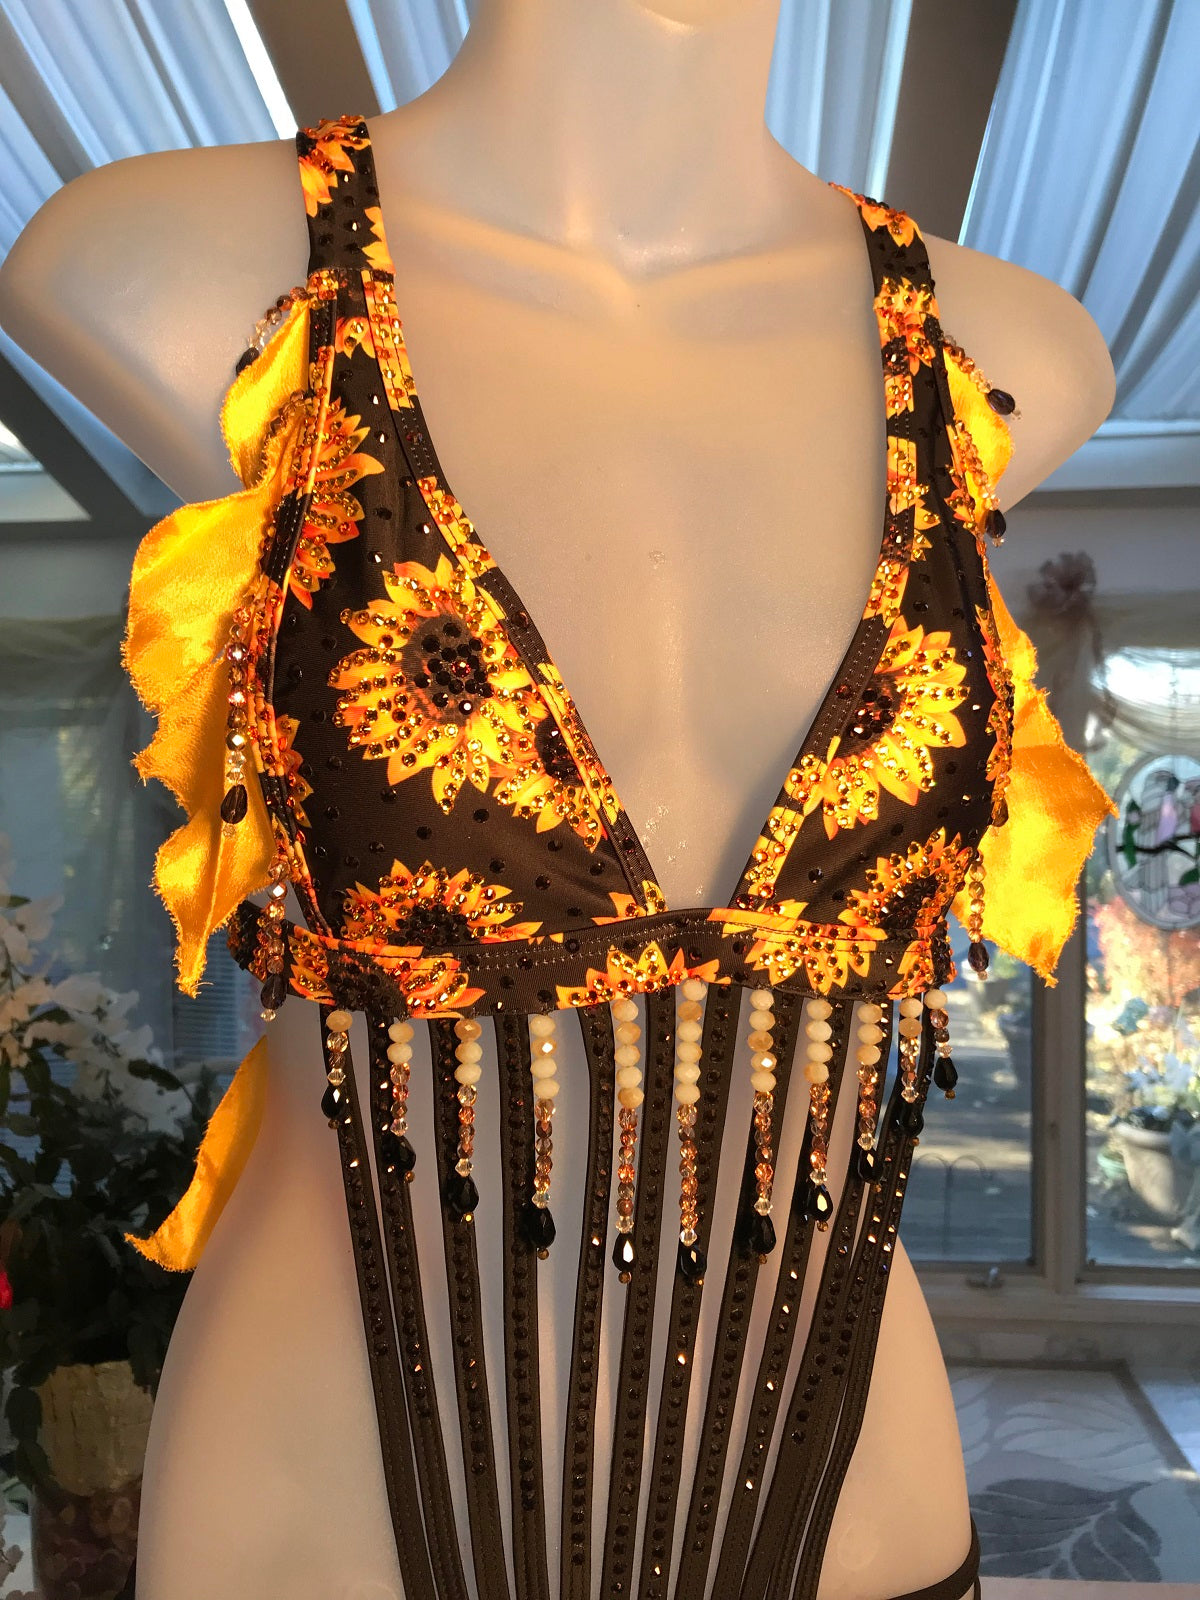 Top view of sunflower print Latin-rhythm dress created from a very strappy detailed bathing suit which I added hand crafted petal shape flounces in sunflower yellow satin & orange variegated organza, with extensive Swarovski hand beading in orange, pearlescent, gold & black faceted beads in round & tear drop shapes along with Swarovski rhinestone work throughout in yellow, orange & bronze.